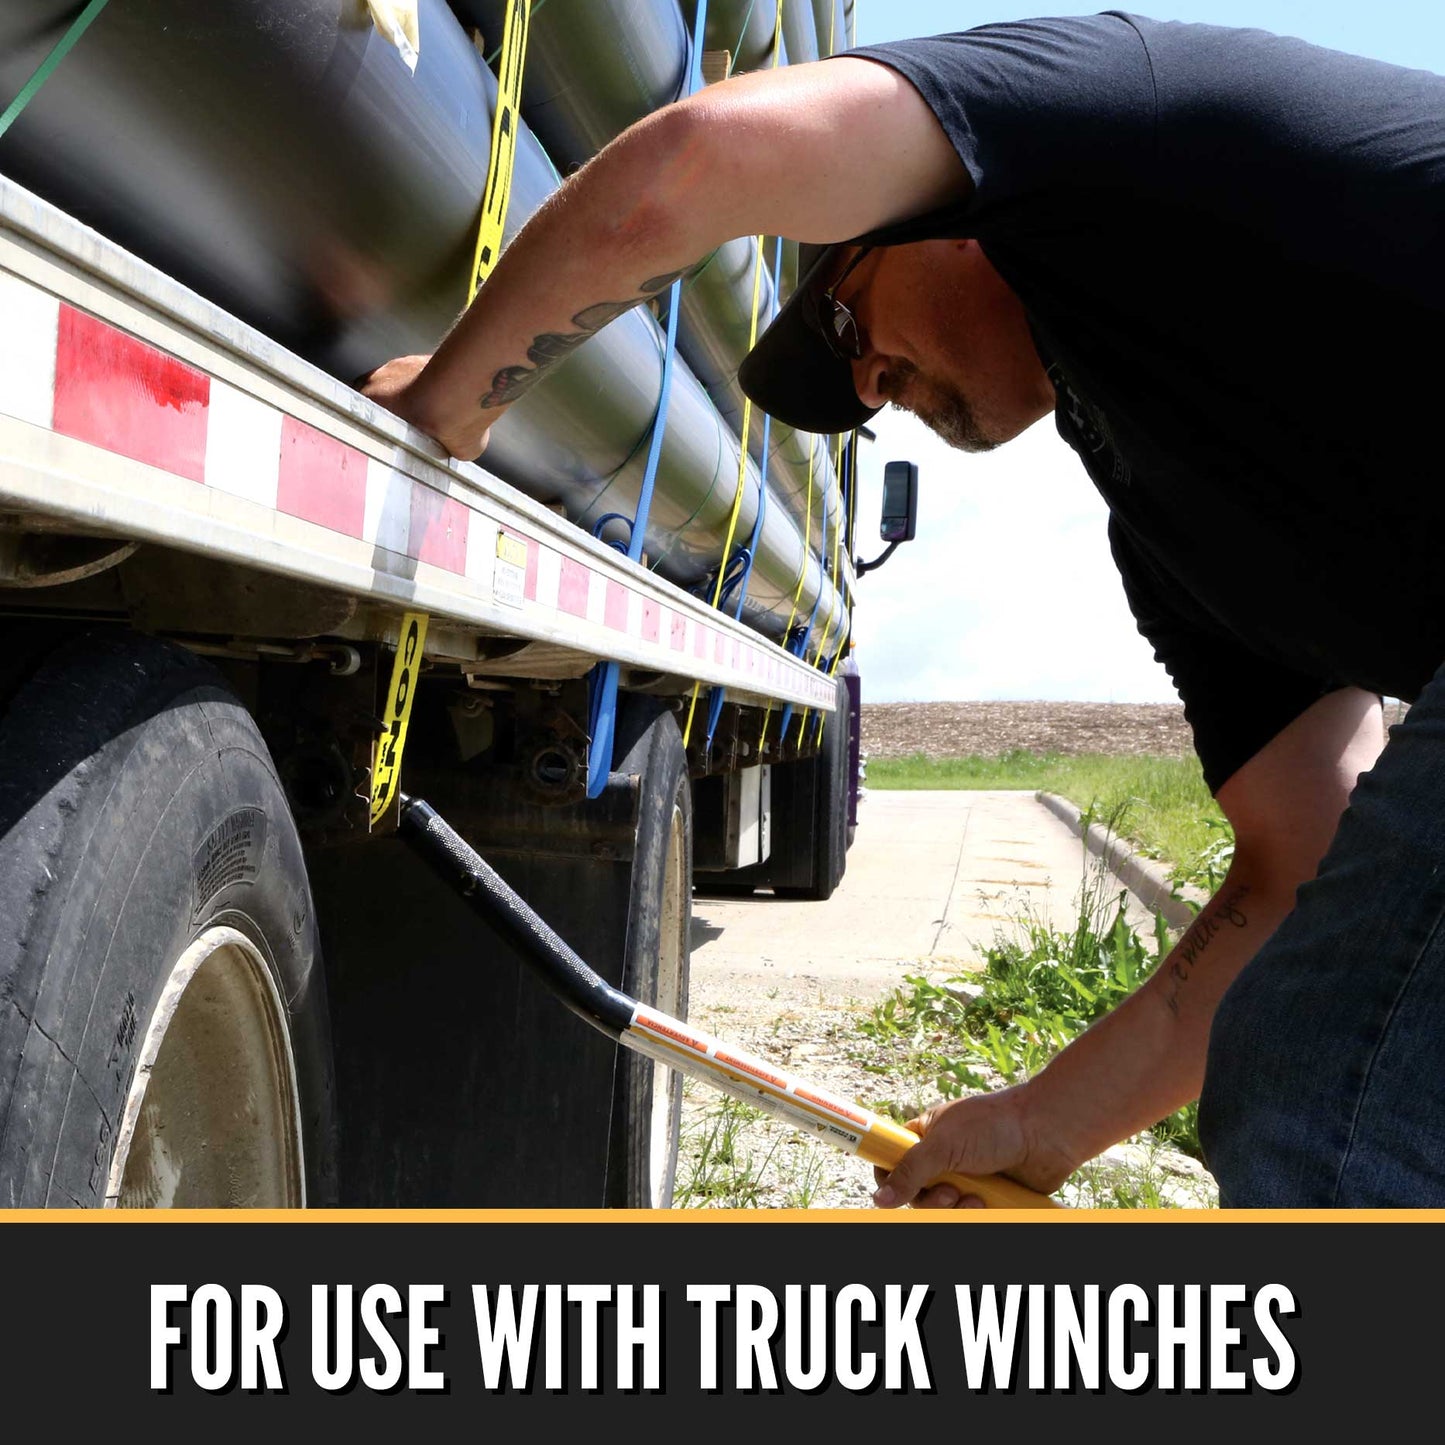 20' winch strap -  winch straps are for use with truck winches